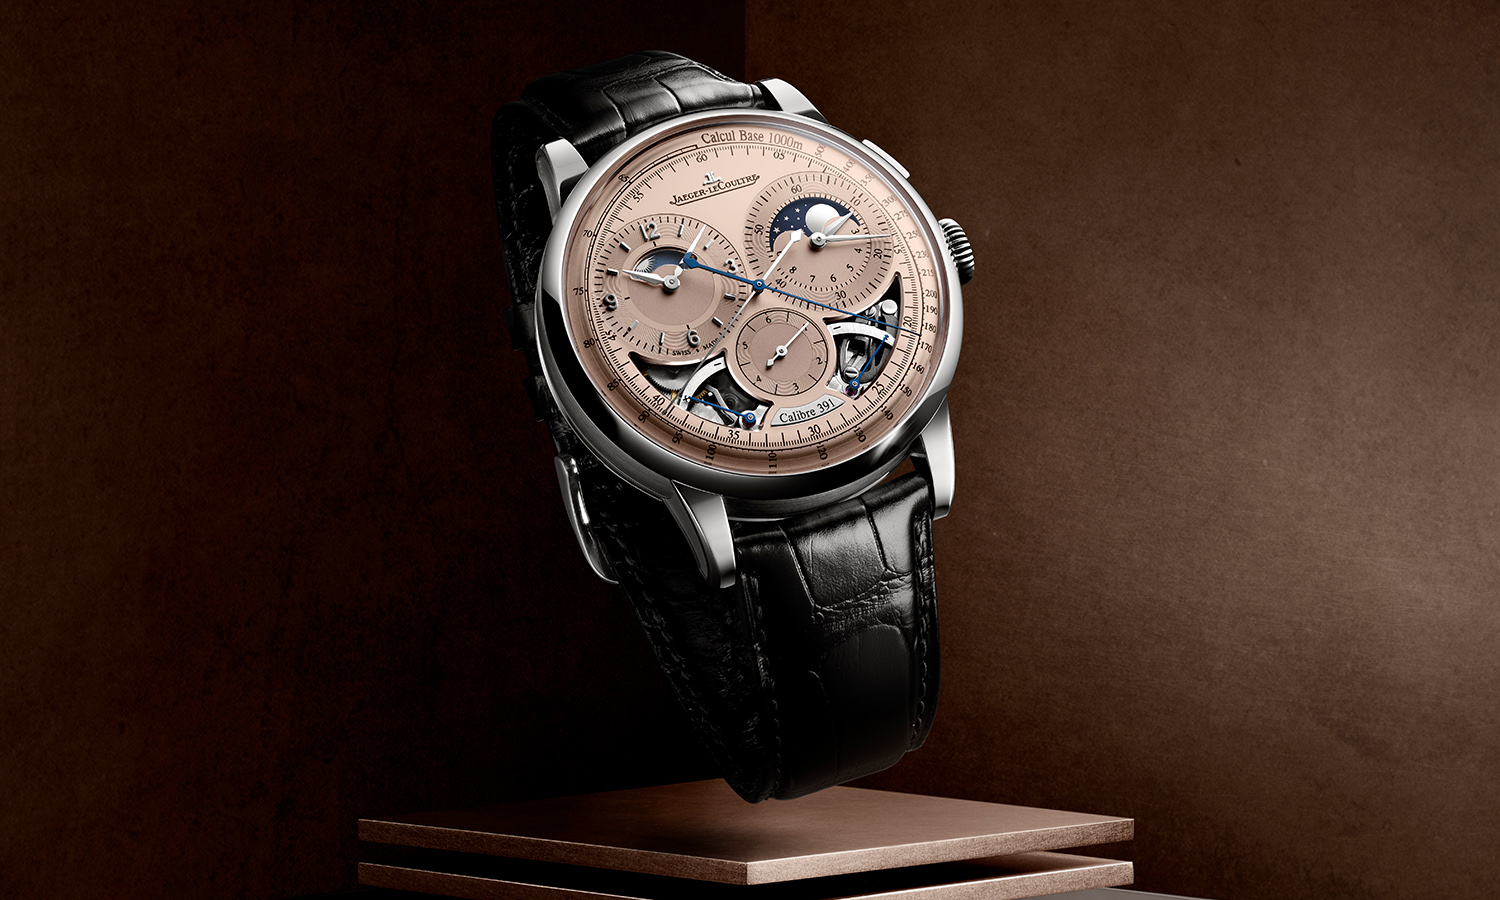 Introducing The Jaeger-LeCoultre Duometre Chronograph Moon